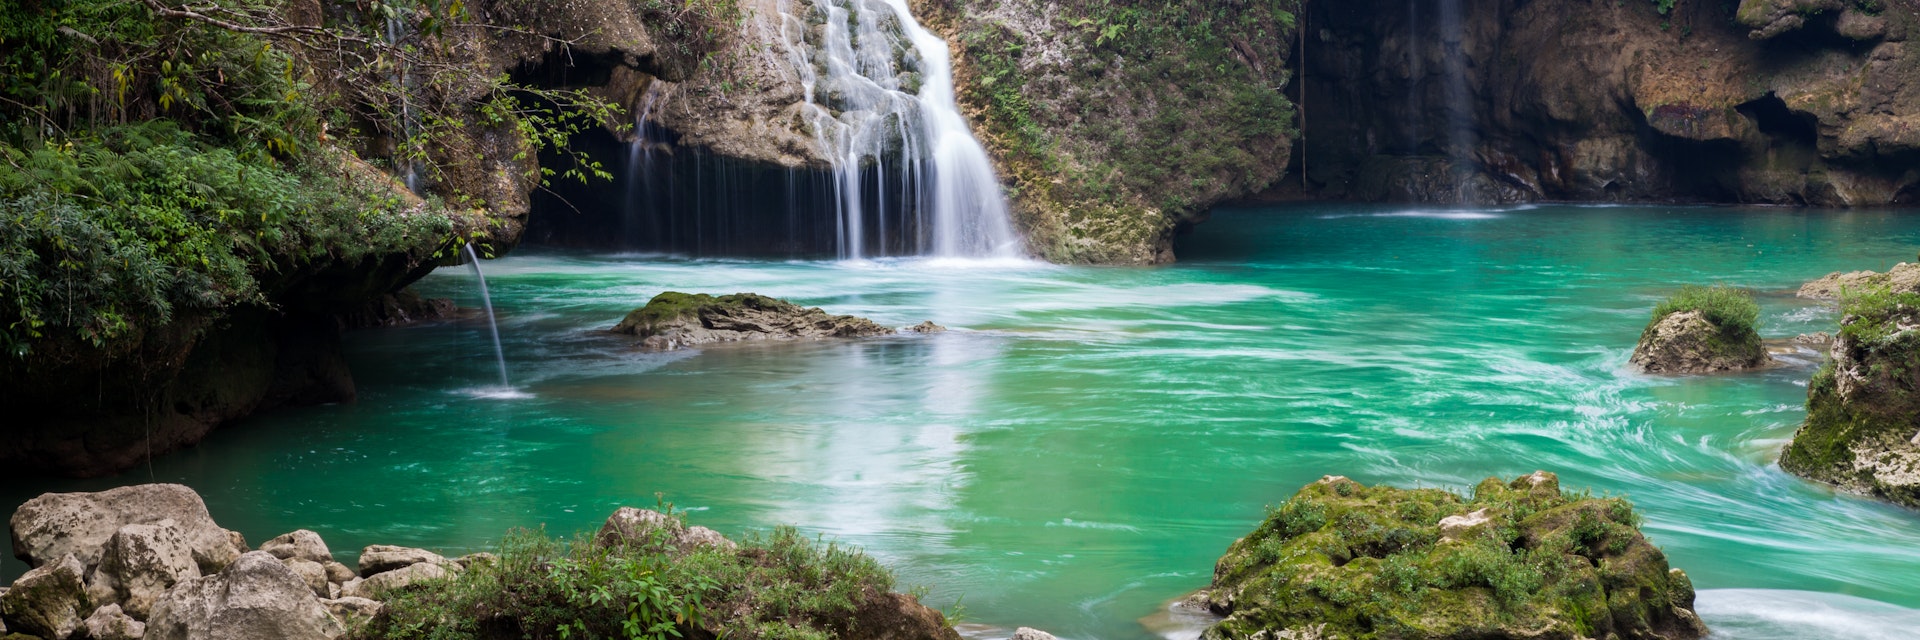 emerald pool and waterfall in gorgeous Semuc Champey national park